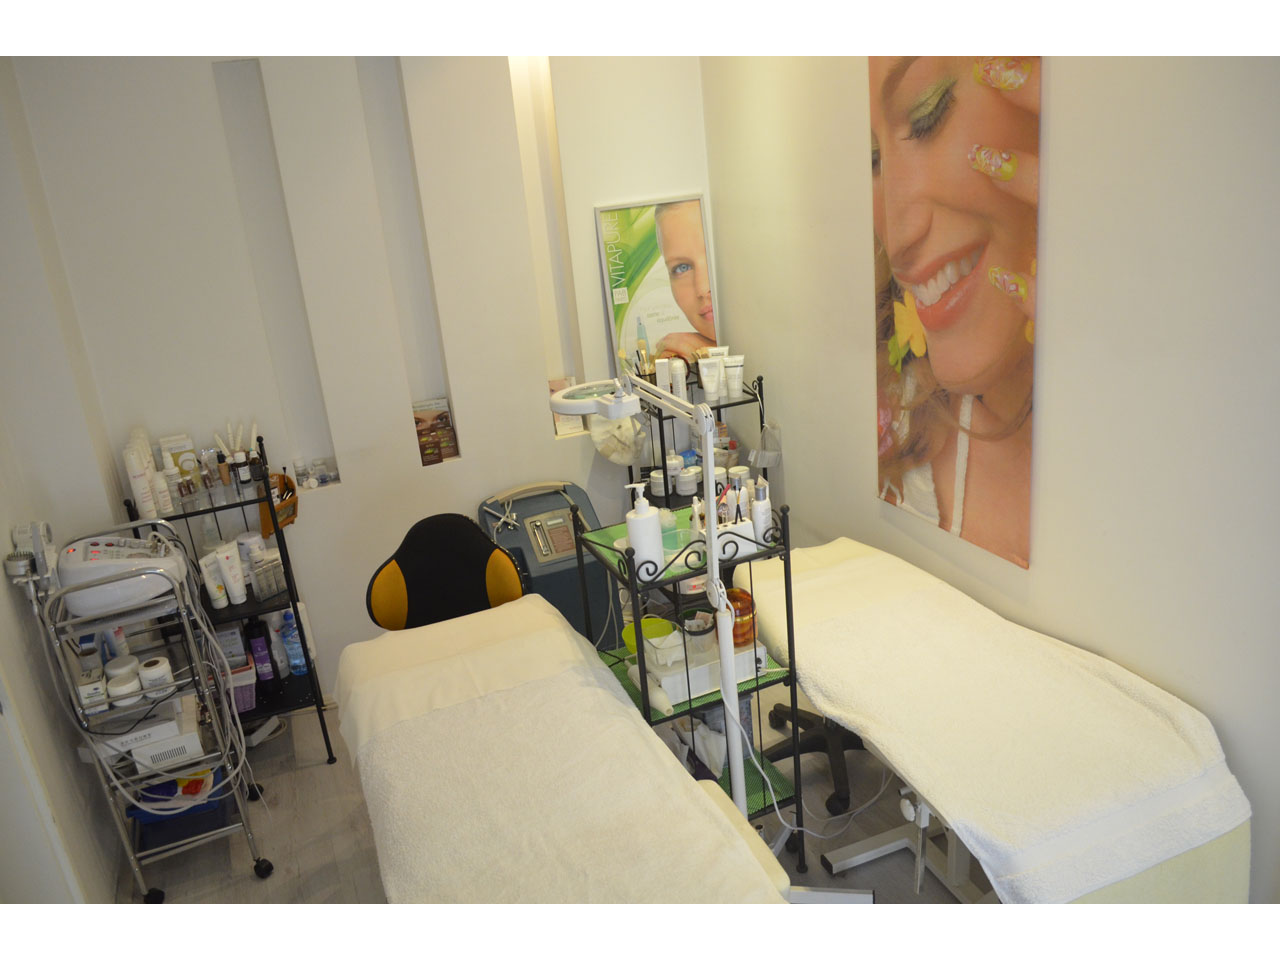 HAIRDRESSING AND COSMETIC SALON ZZ2 Hairdressers Belgrade - Photo 6